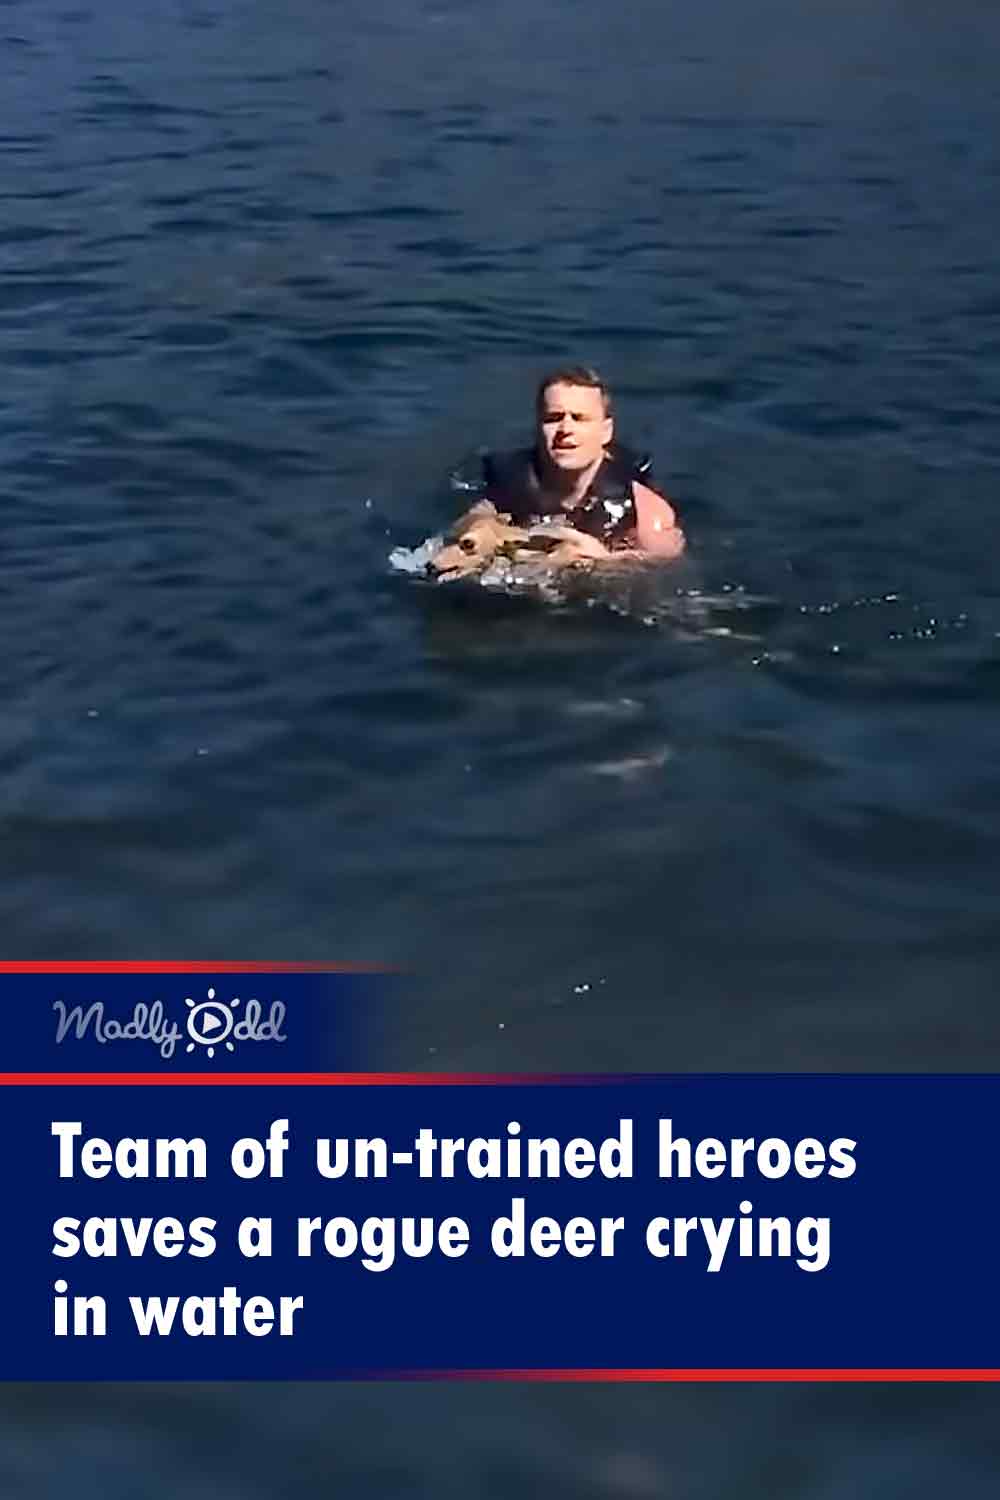 Team of un-trained heroes saves a rogue deer crying in water